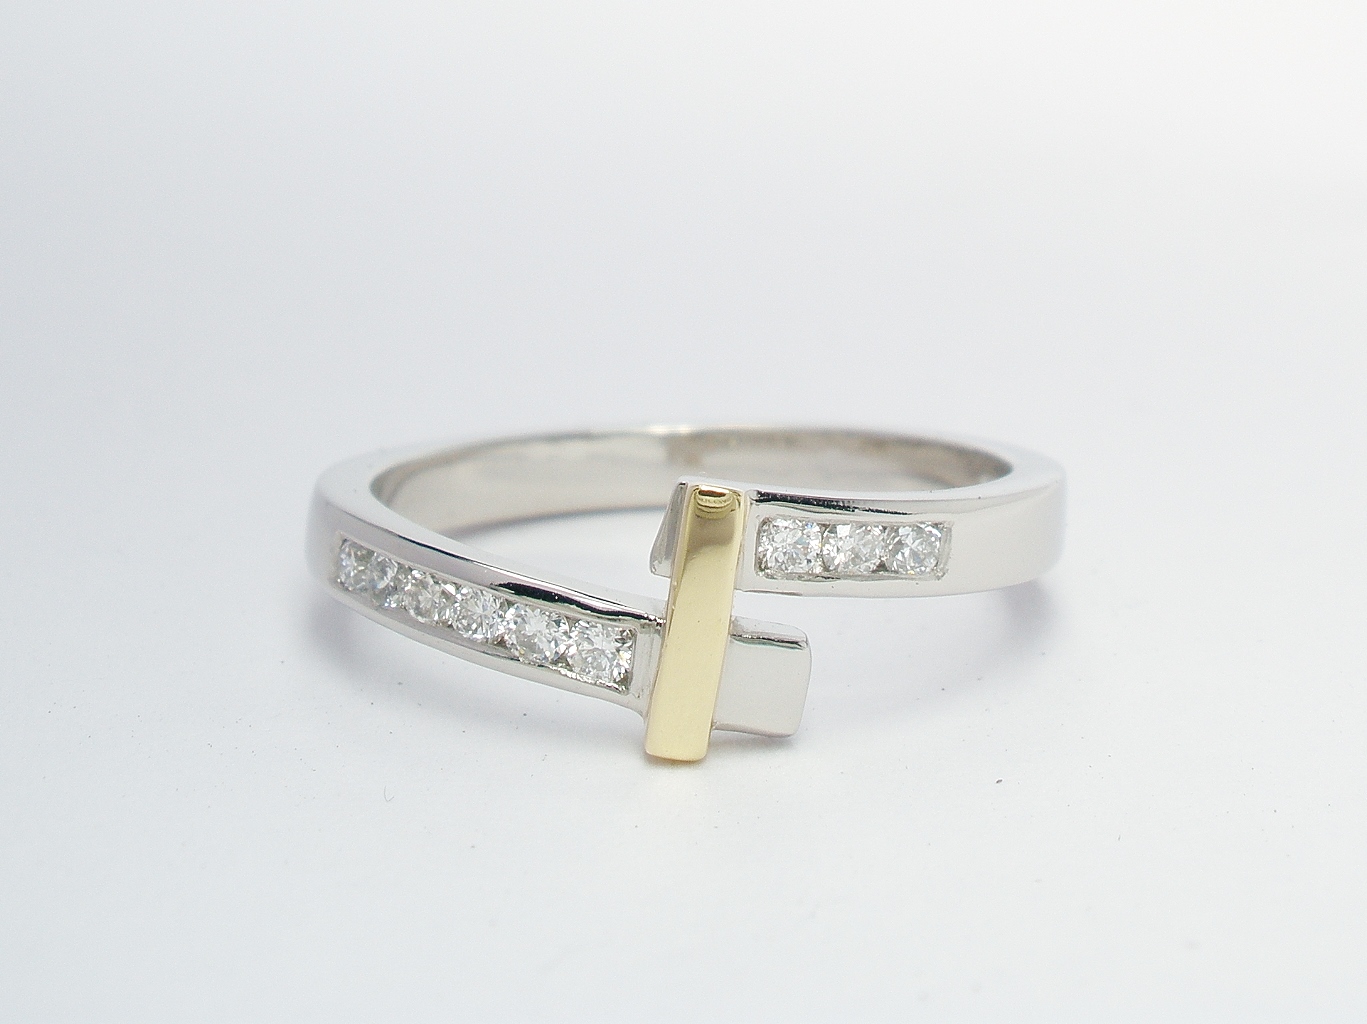 A palladium wedding ring shaped to fit a single stone cross-over diamond ring channel set with diamonds and an 18ct. yellow gold bridge.